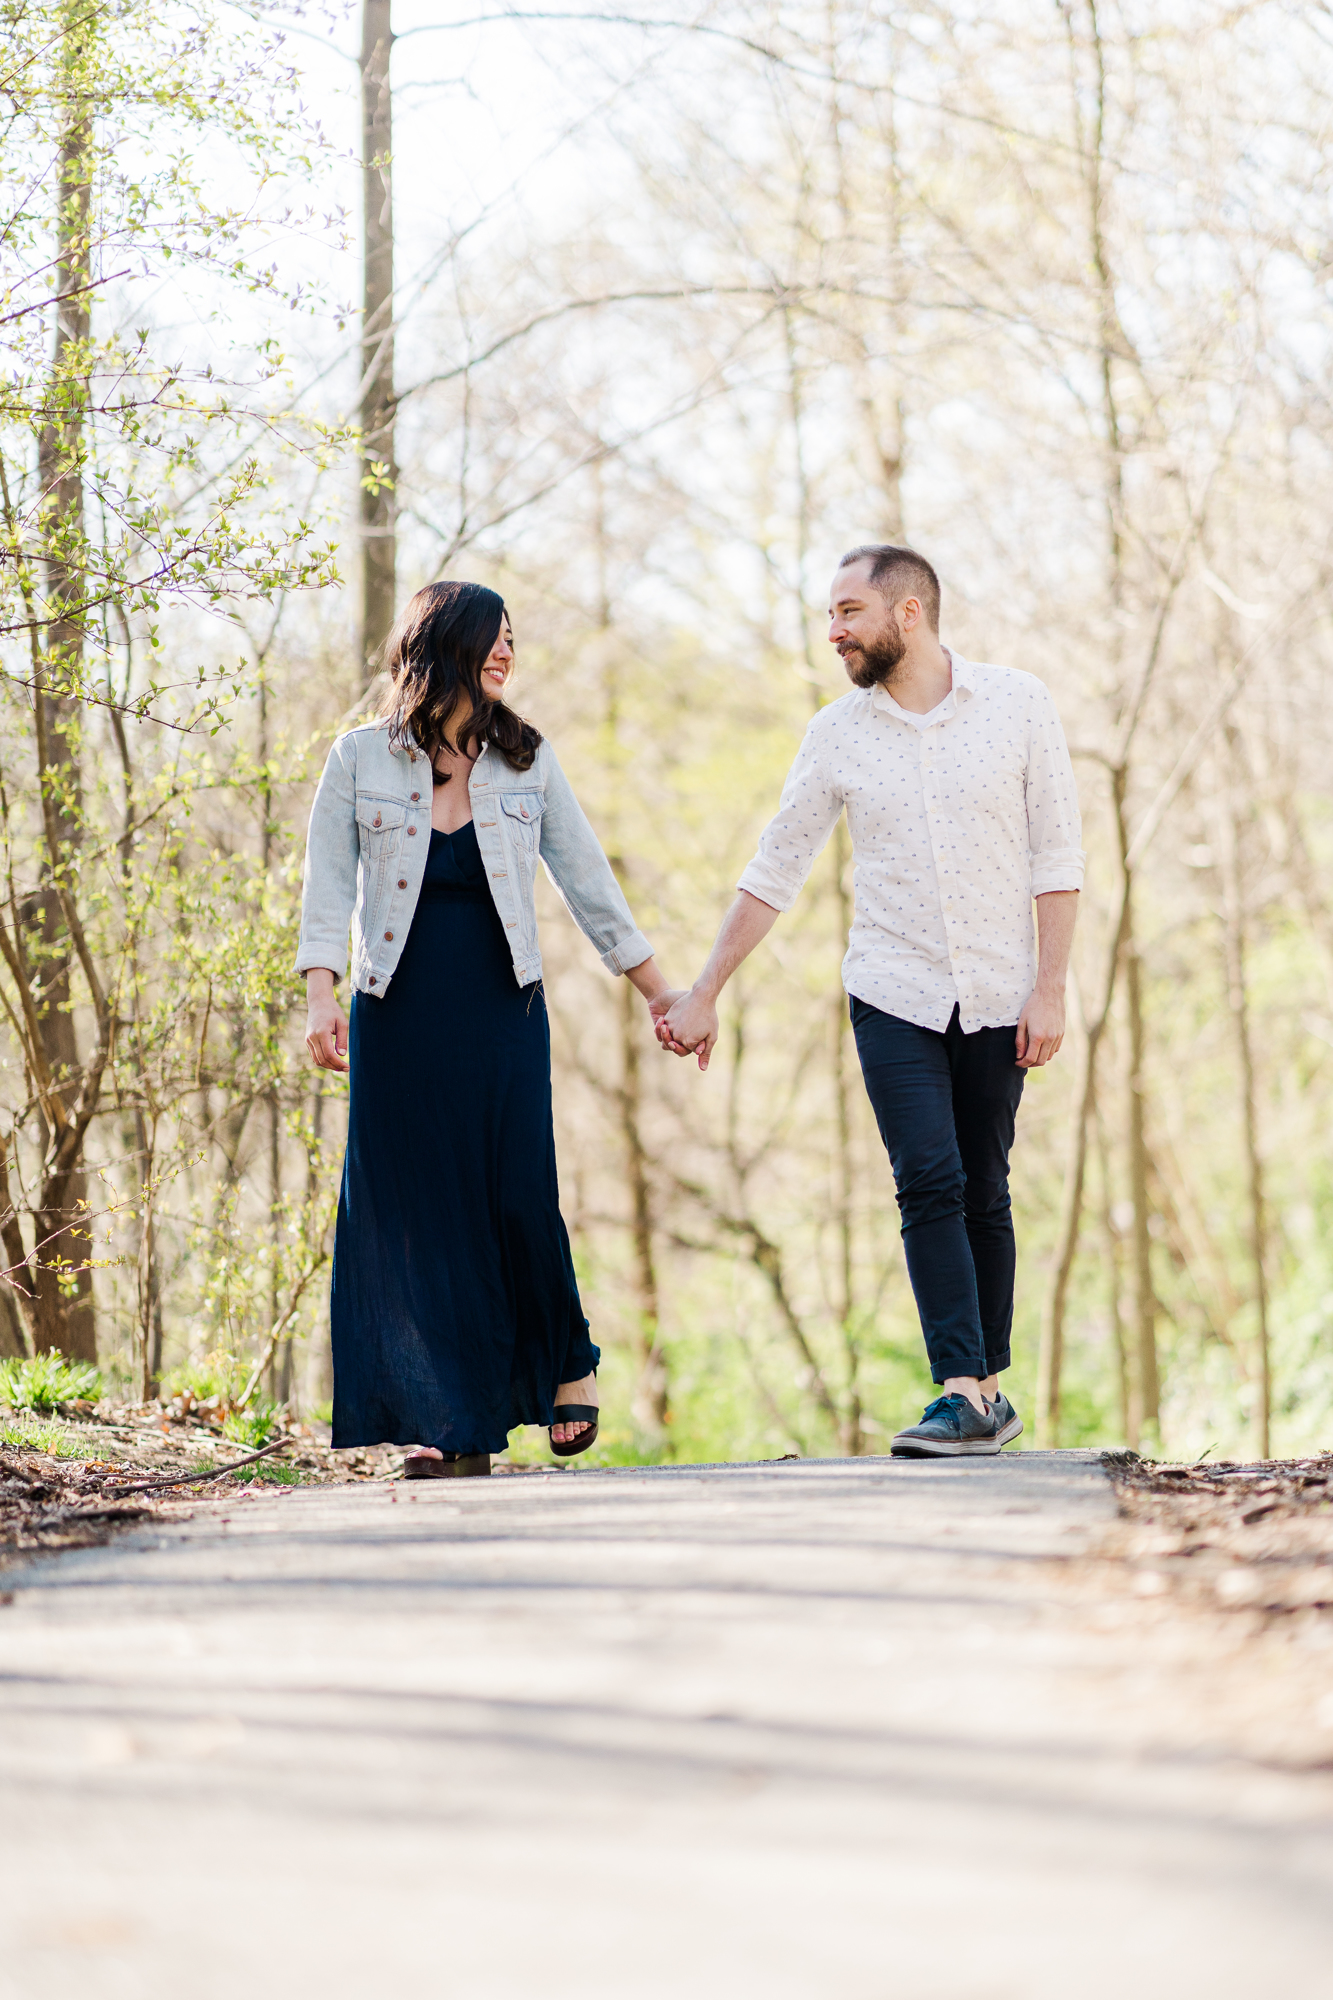 Cheerful Prospect Park Engagement Session